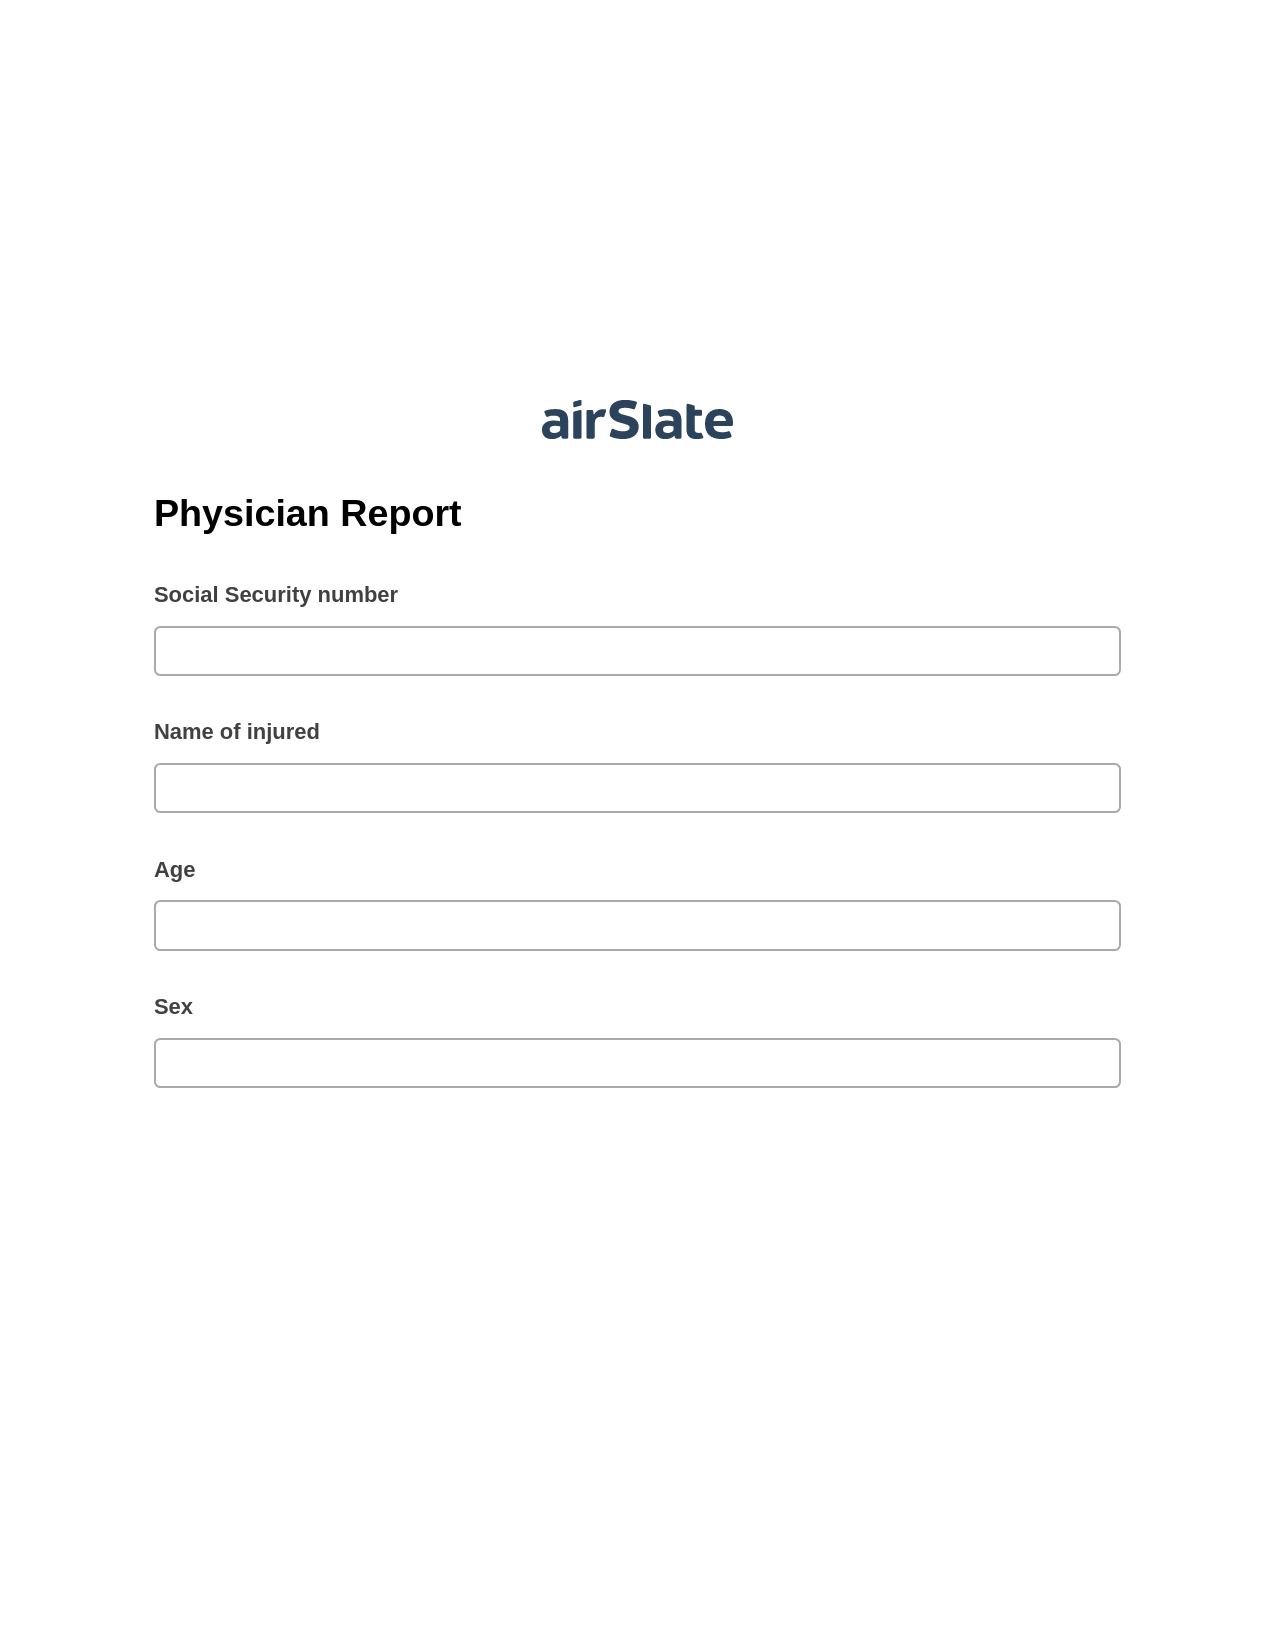 Multirole Physician Report Prefill from NetSuite records, Google Cloud Print Bot, Archive to Box Bot